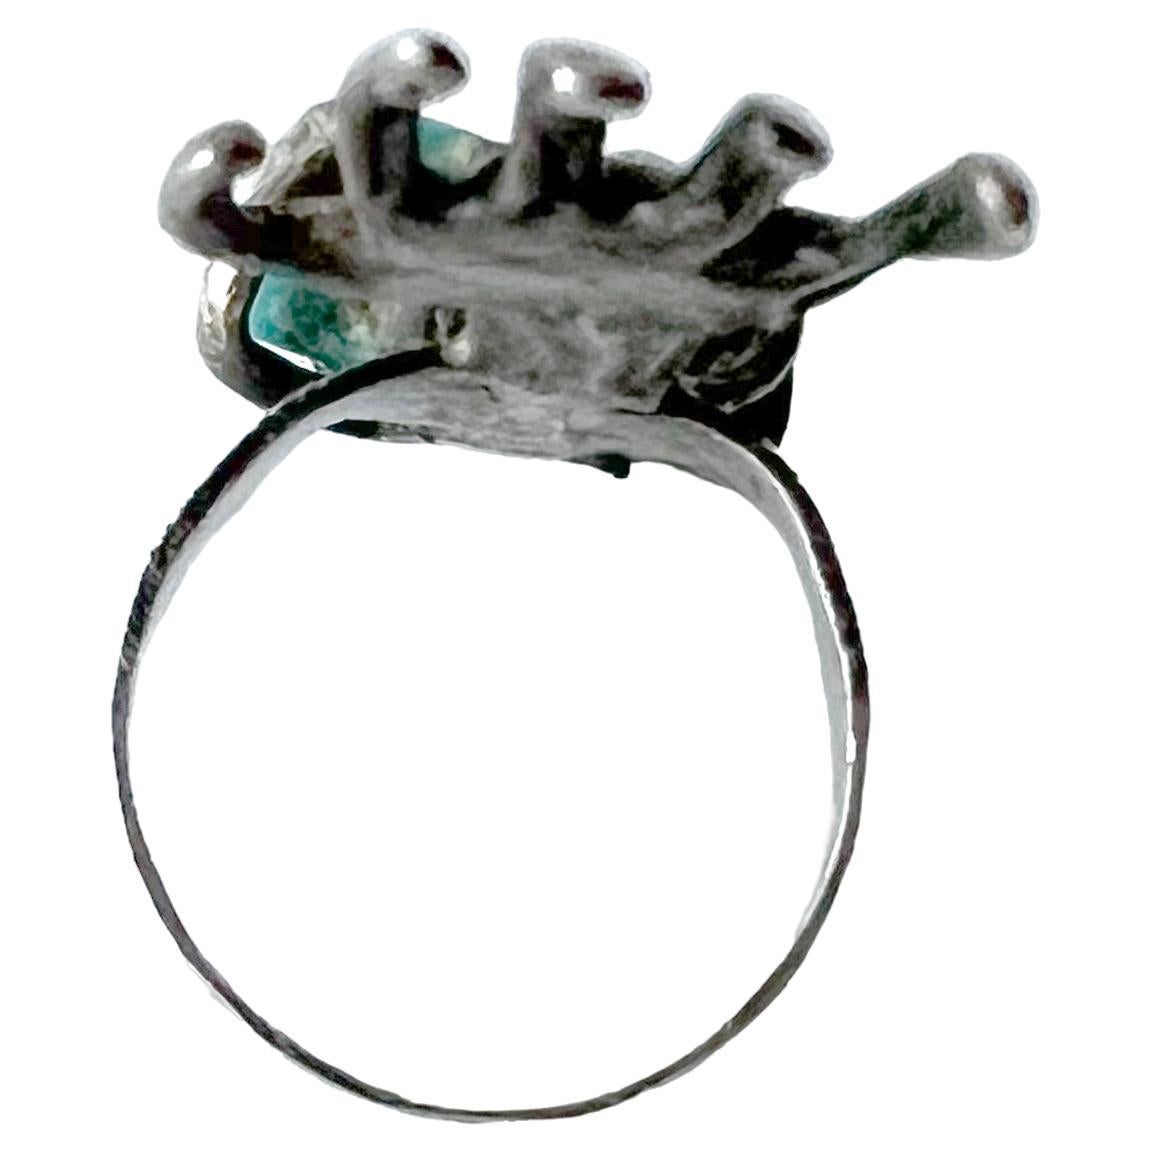 Uncut 1960s Pal Kepenyes Mexican Surrealist Silver Turquoise Arm With Hand Ring  For Sale